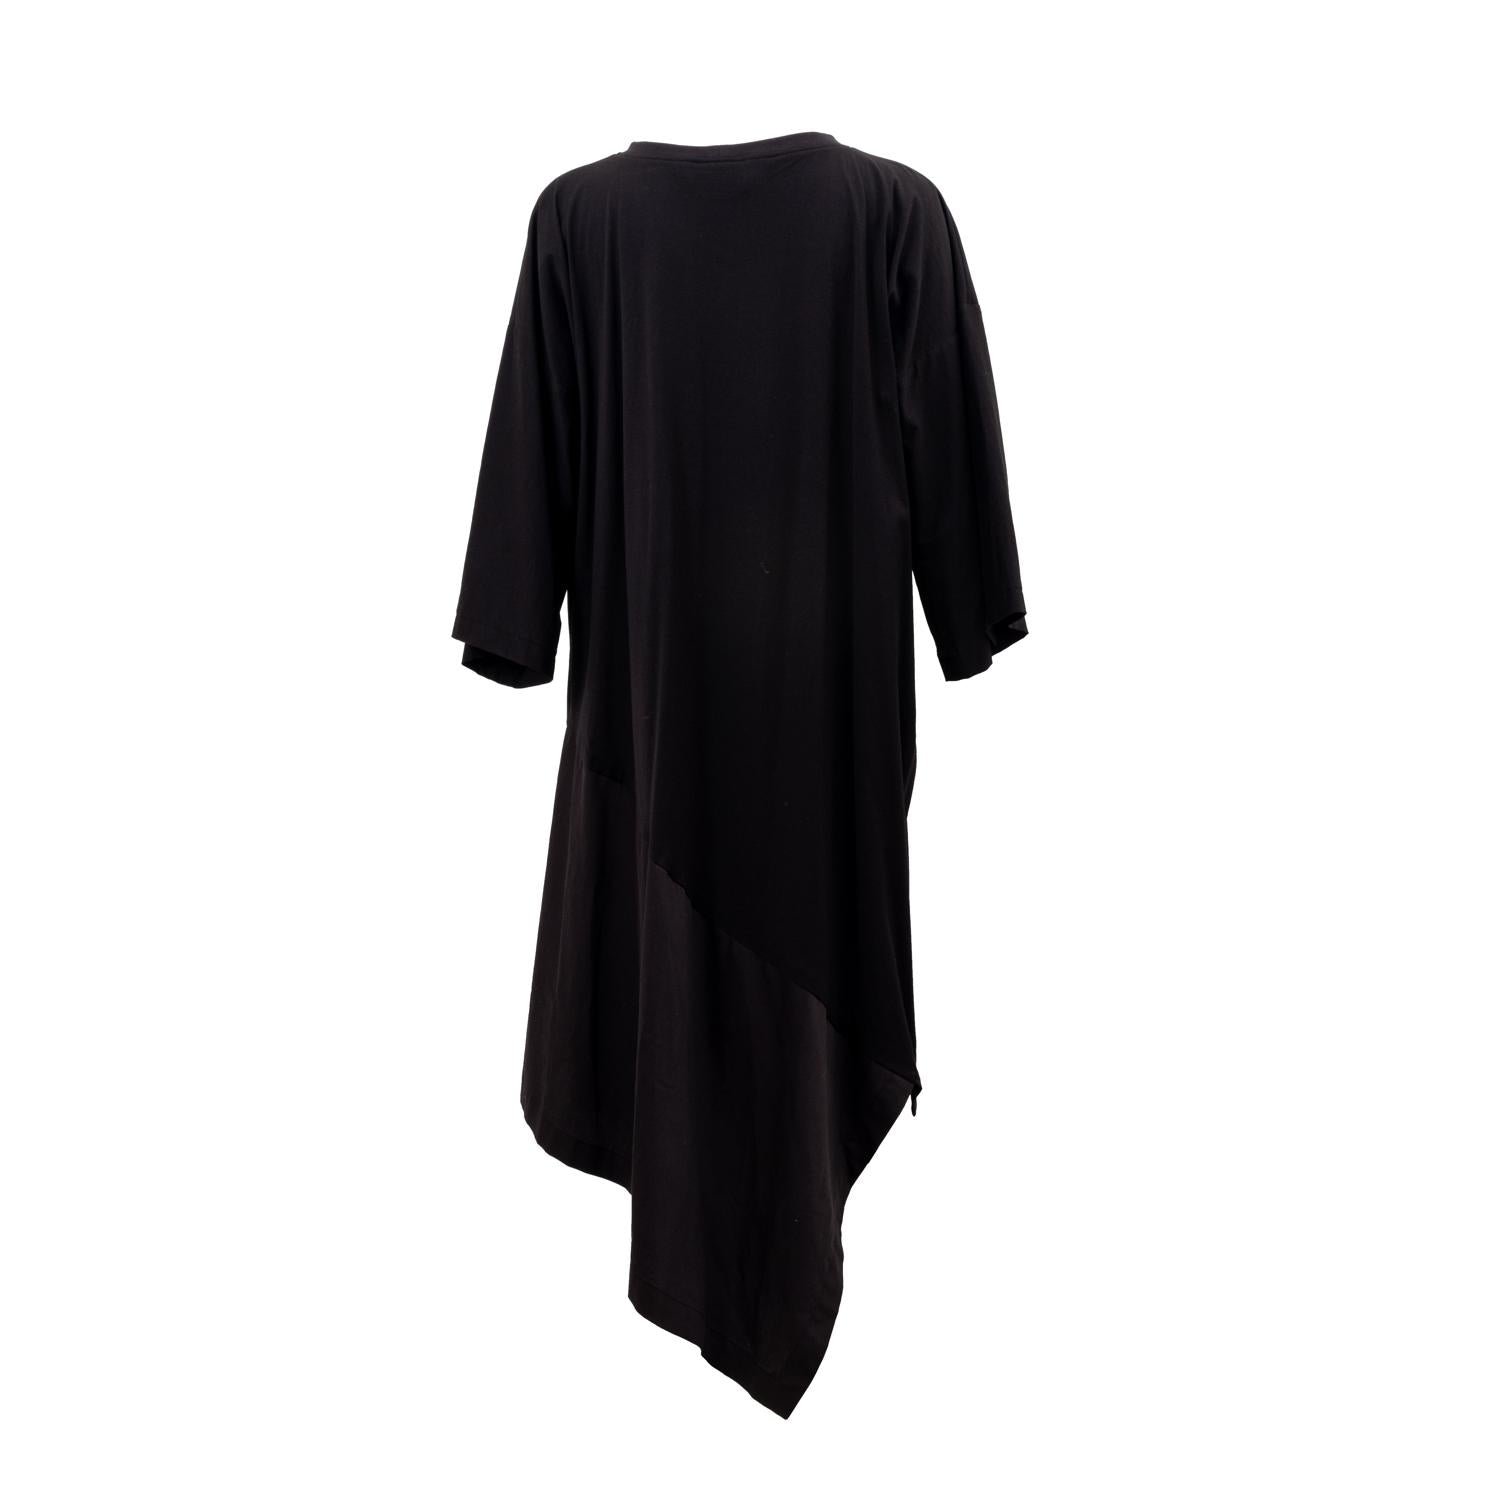 Asymmetrical oversized dress in black made from organic cotton